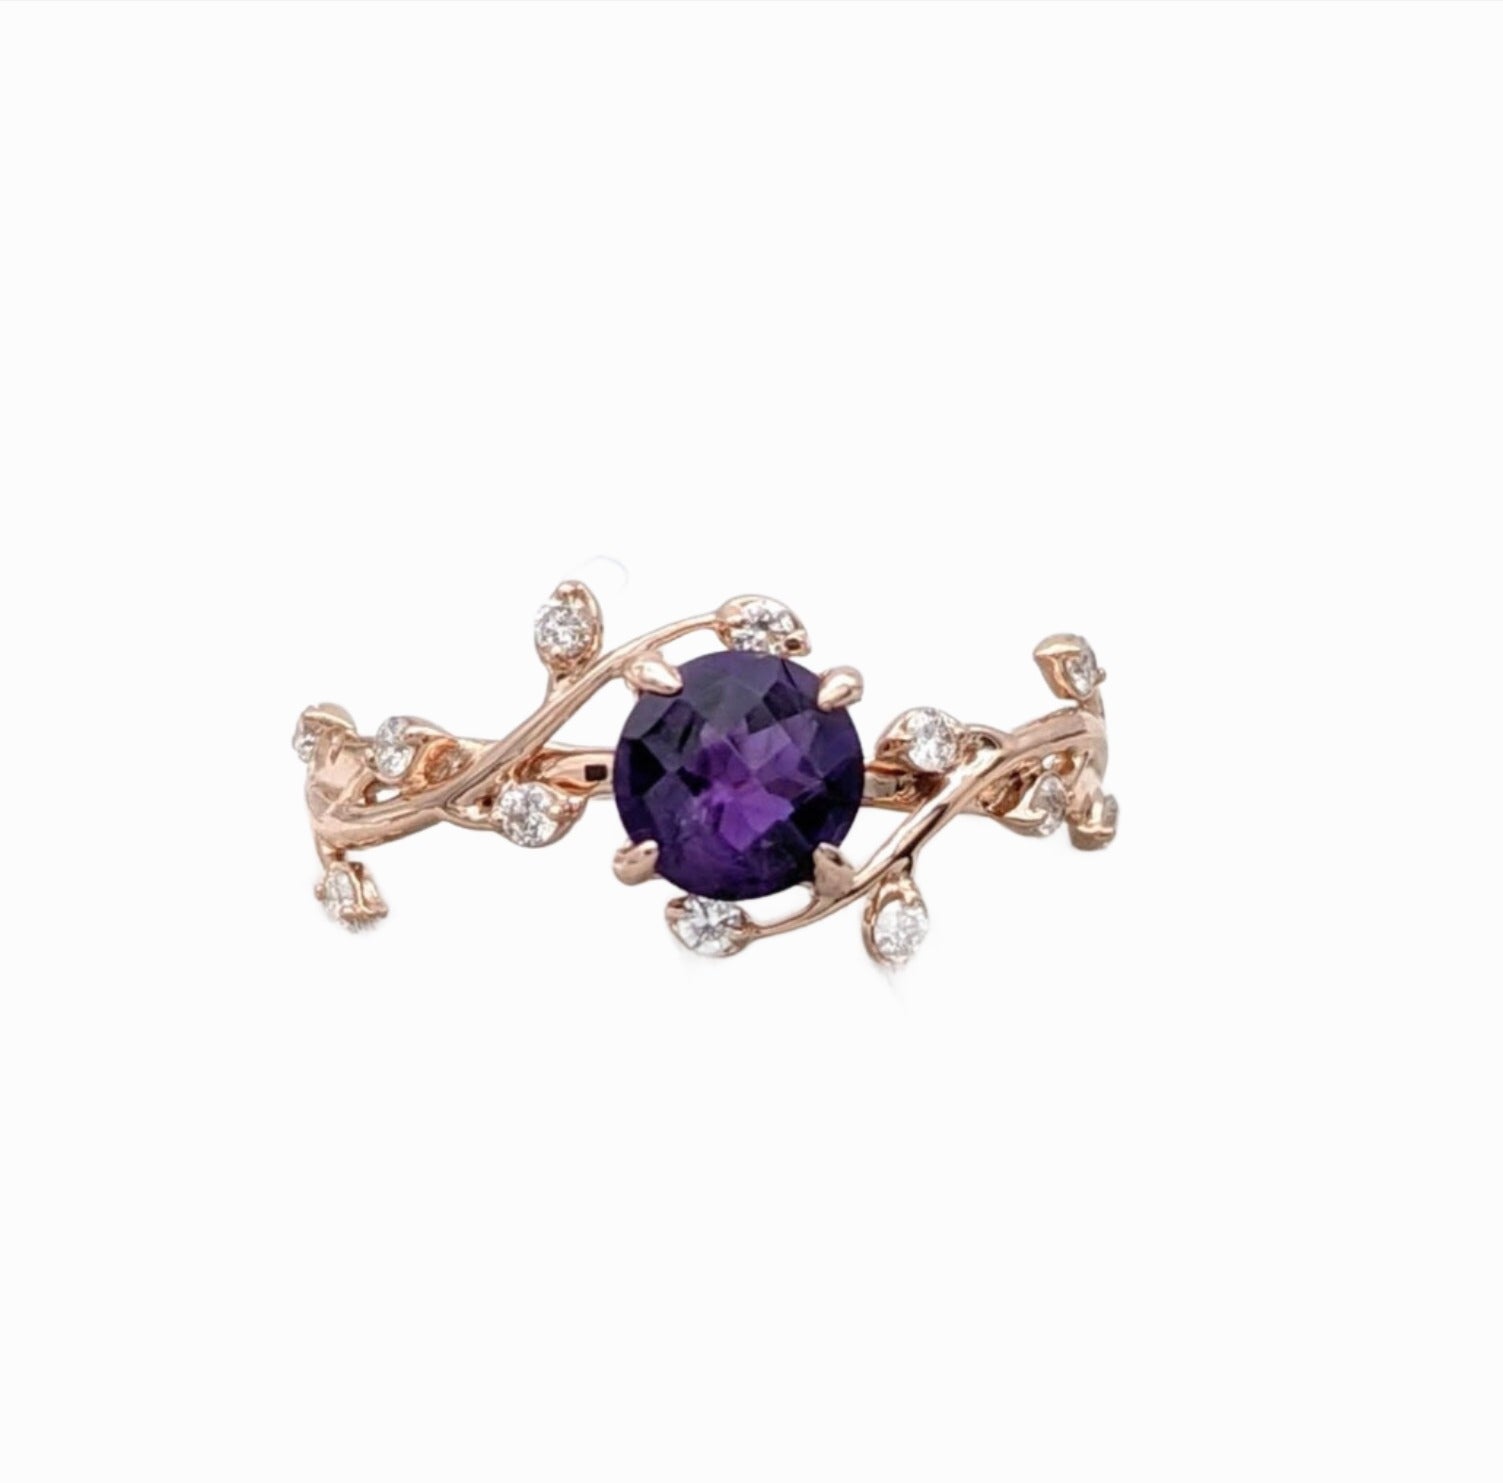 Statement Rings-Amethyst Vine Ring w All Natural Diamond Accents in Solid 14k Gold || Round 5mm || Earth Mined || February Birthstone || Customizable - NNJGemstones